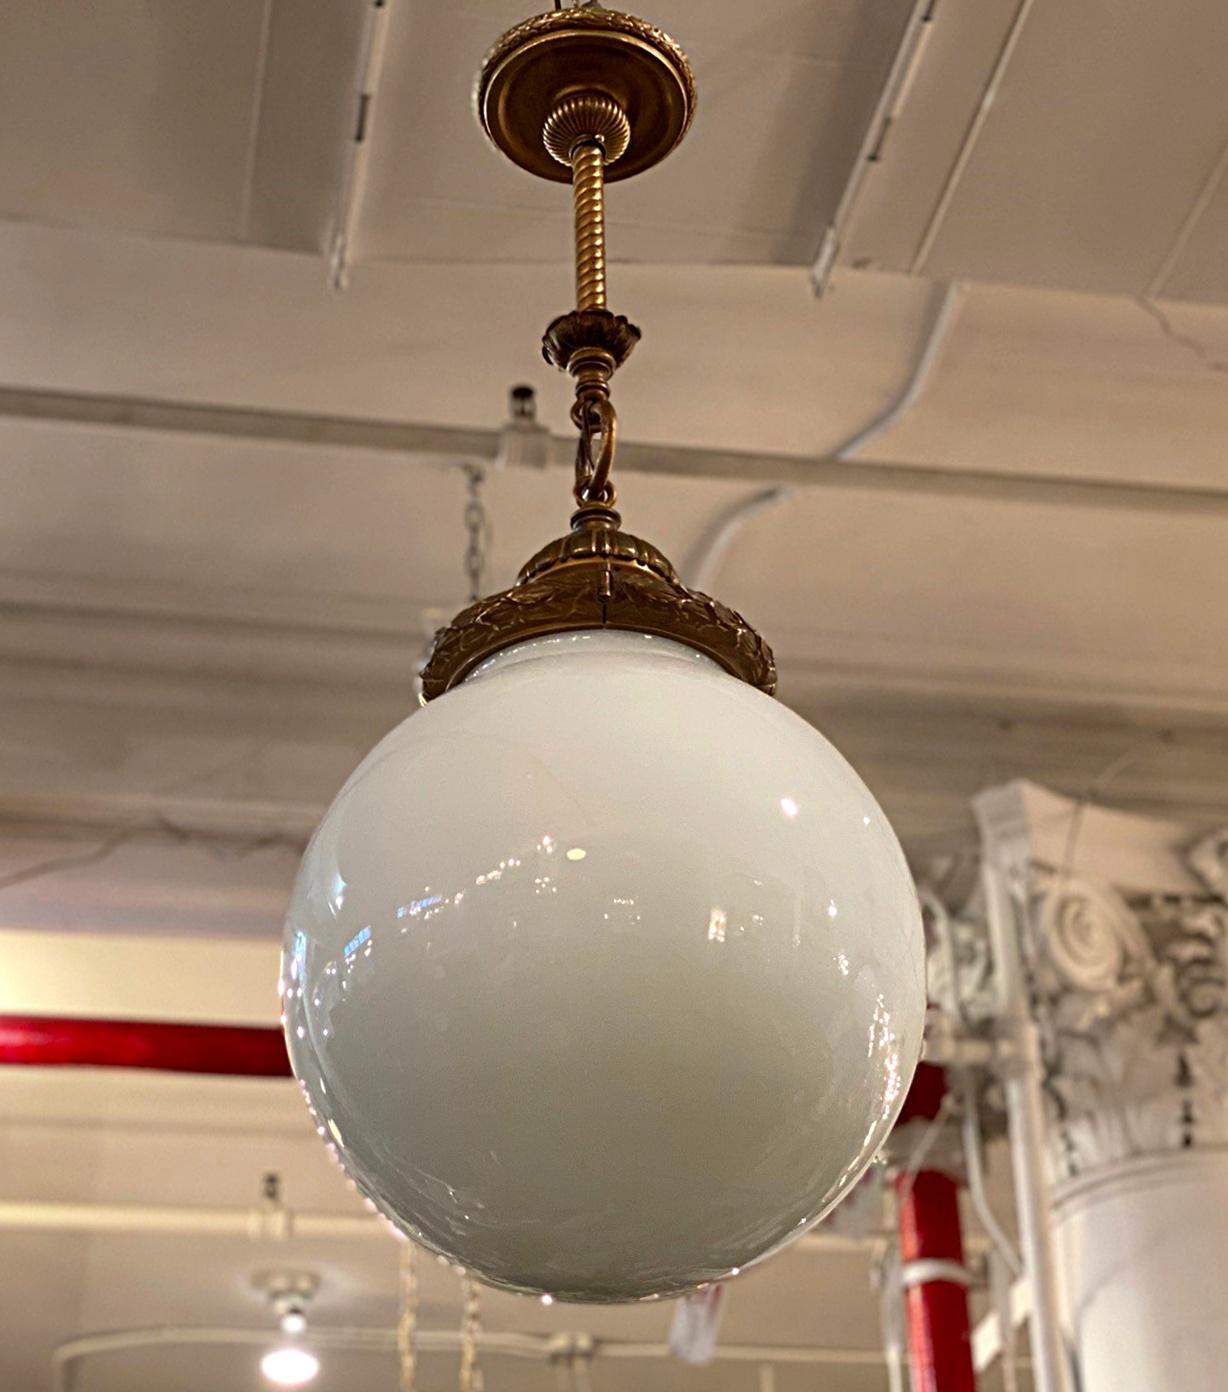 1920s brass pendant light with a large white opal glass globe. The cap has an antique brass patina with decorated wreath and ribbon design attached with a chain and tube fixture. This can be seen at our 333 West 52nd St location in the Theater